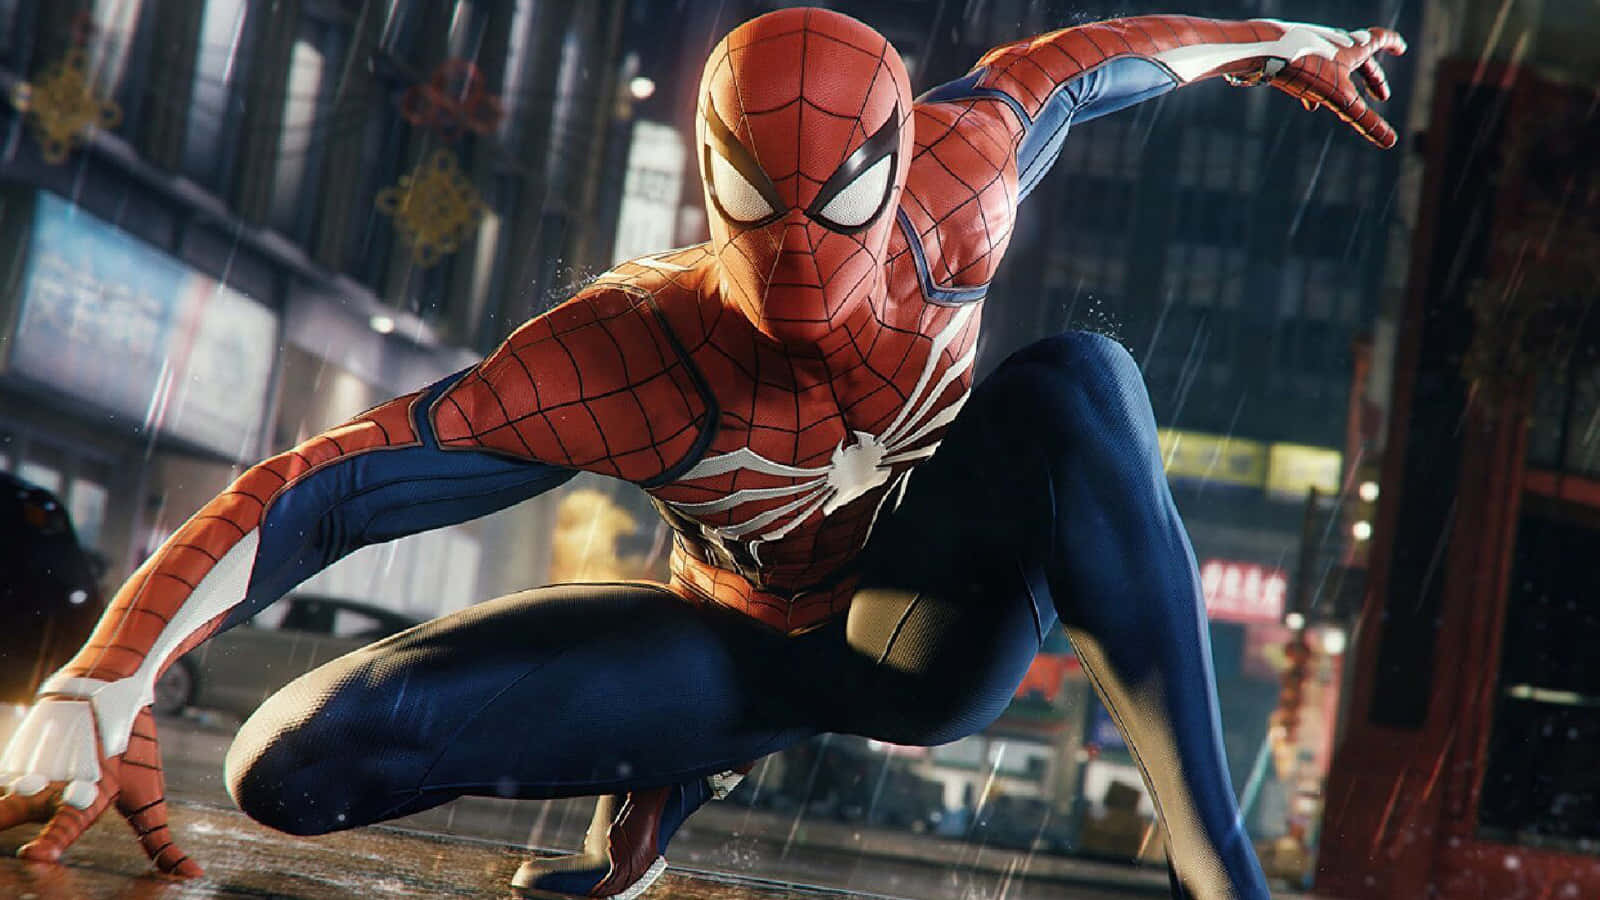 400+] Spiderman Pictures | Wallpapers.com